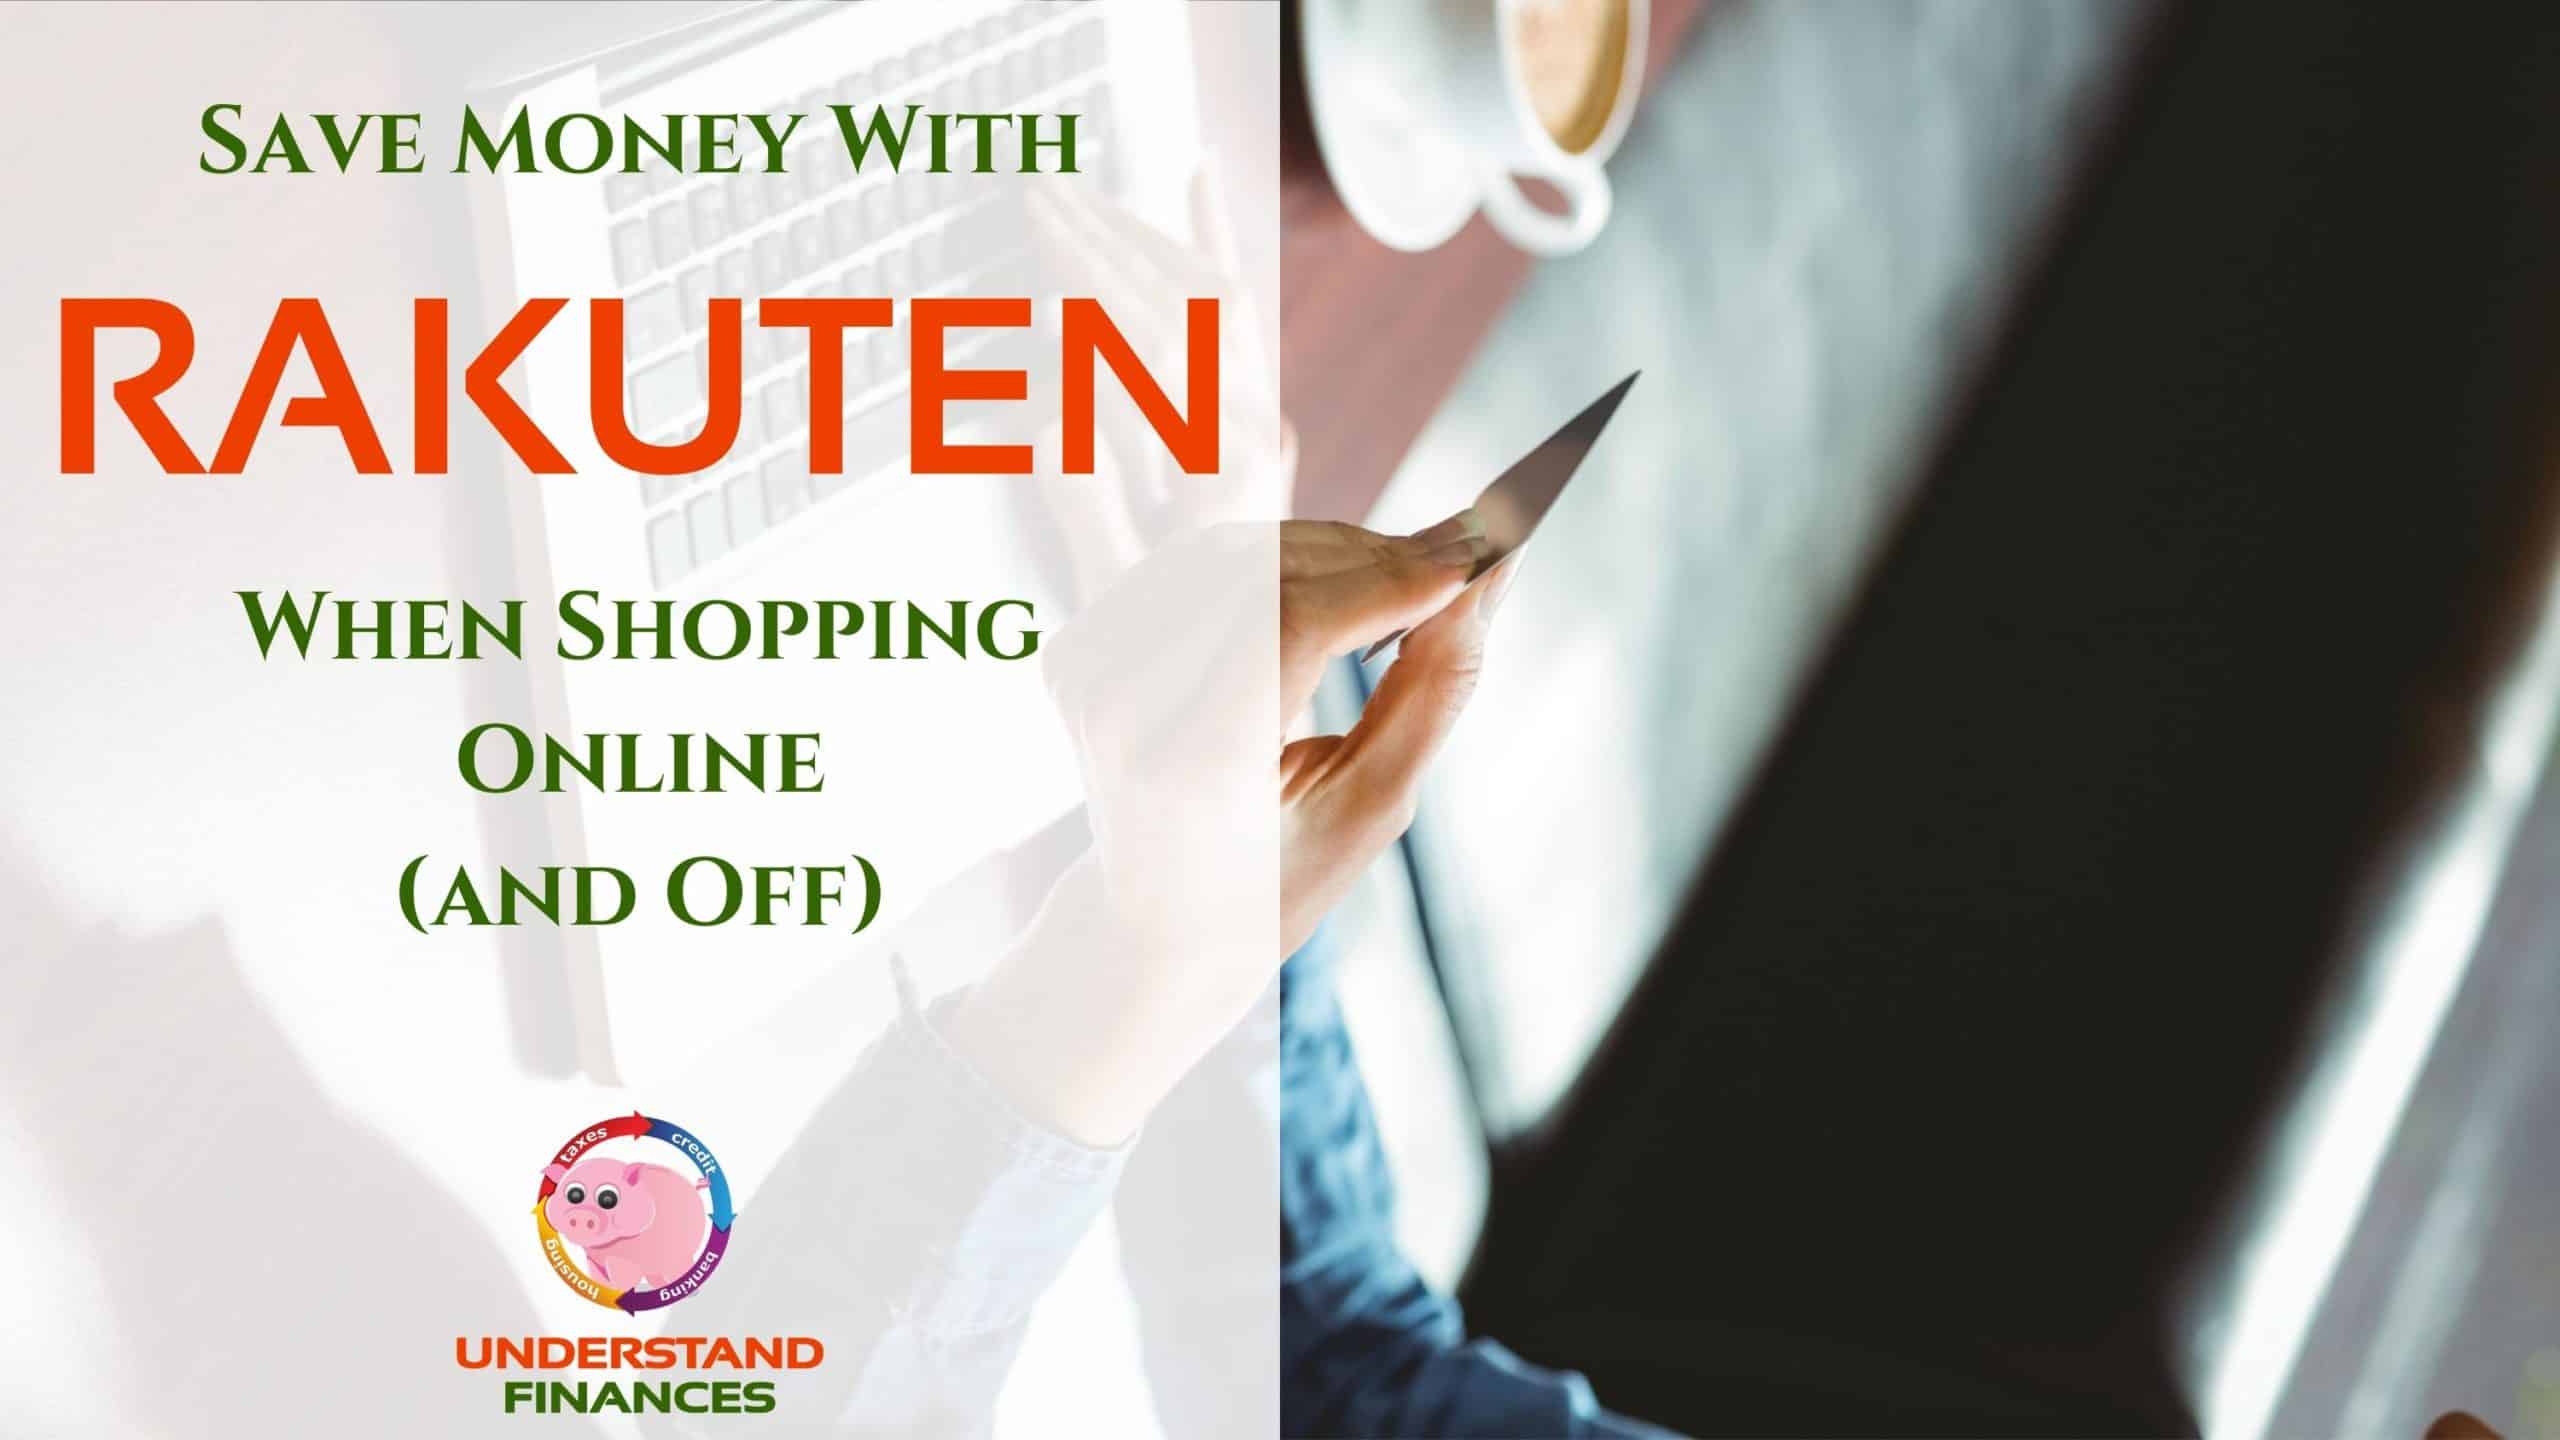 Save Money With Rakuten (eBates) When Shopping Online (And Off)